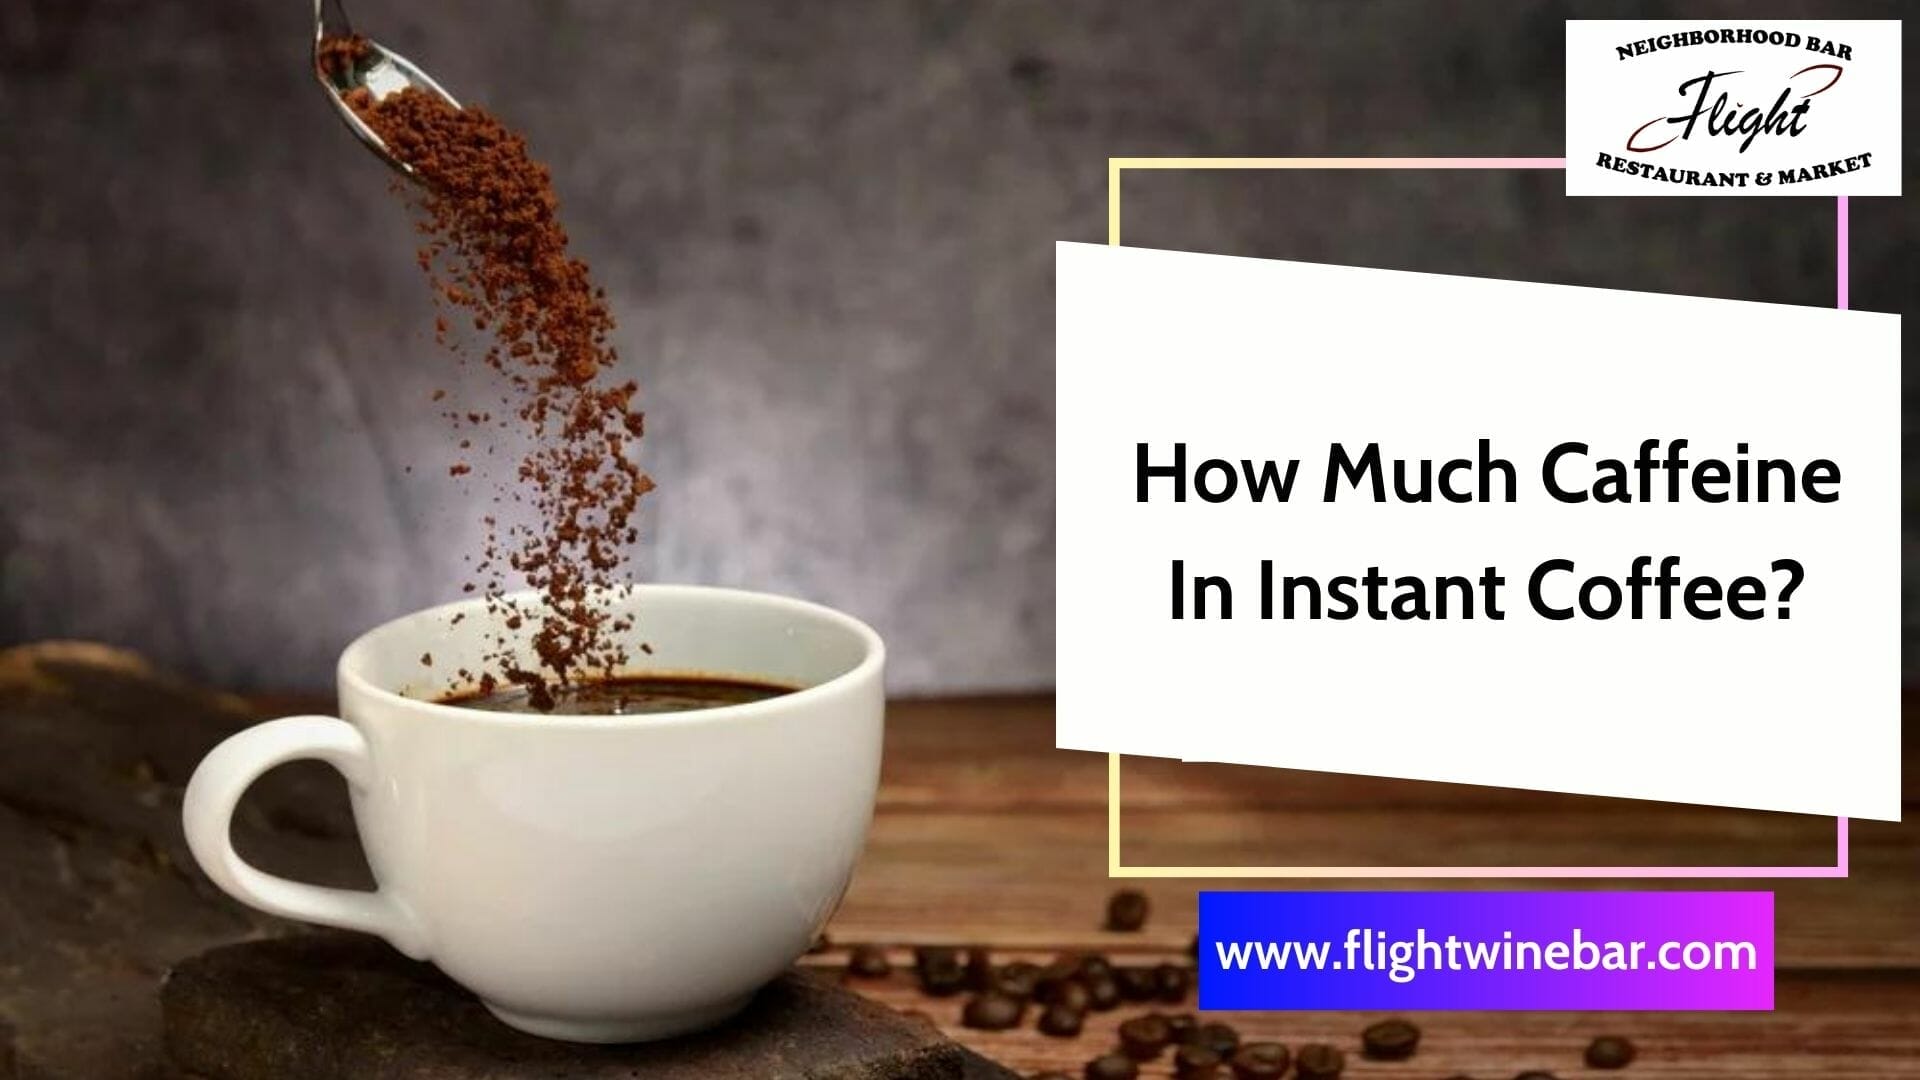 How Much Caffeine In Instant Coffee